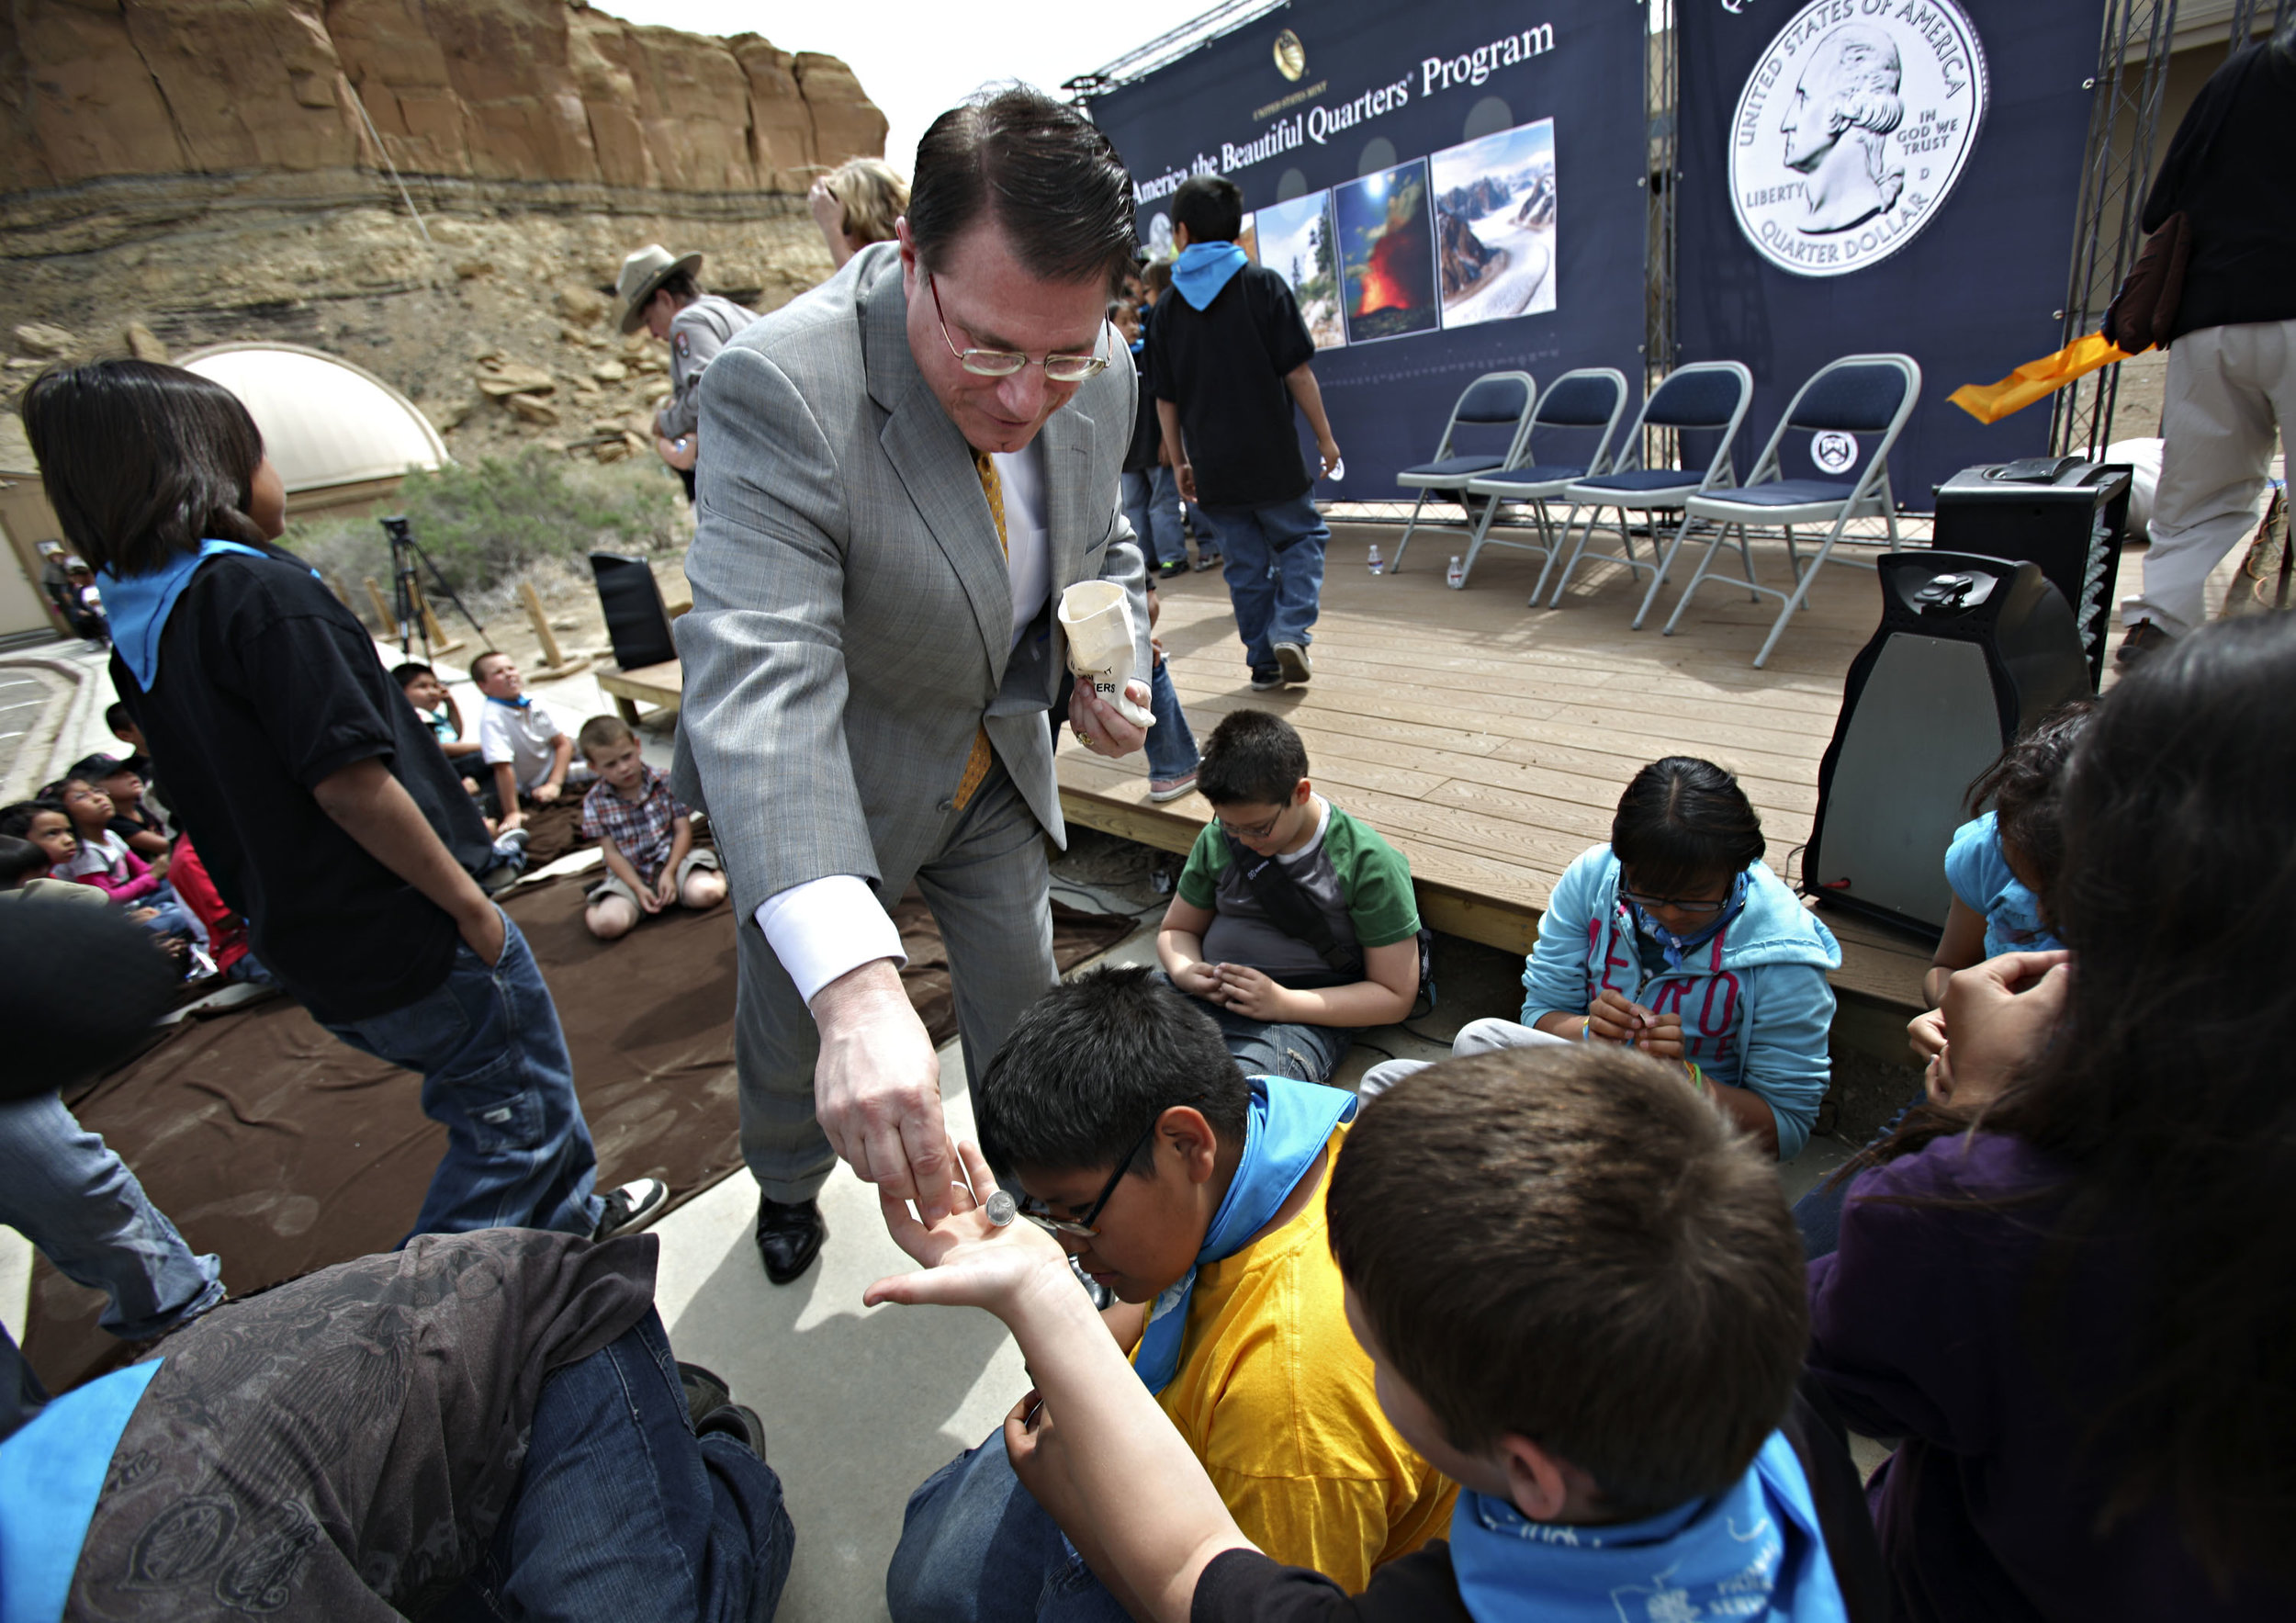  Deputy Director of the United State Mint Richard Peterson hands out Chaco Canyon quarters to 5th graders from Apache Elementary during the quarter launch at Chaco Canyon, Thursday, April 26, 2012. (Morgan Petroski/Albuquerque Journal) 